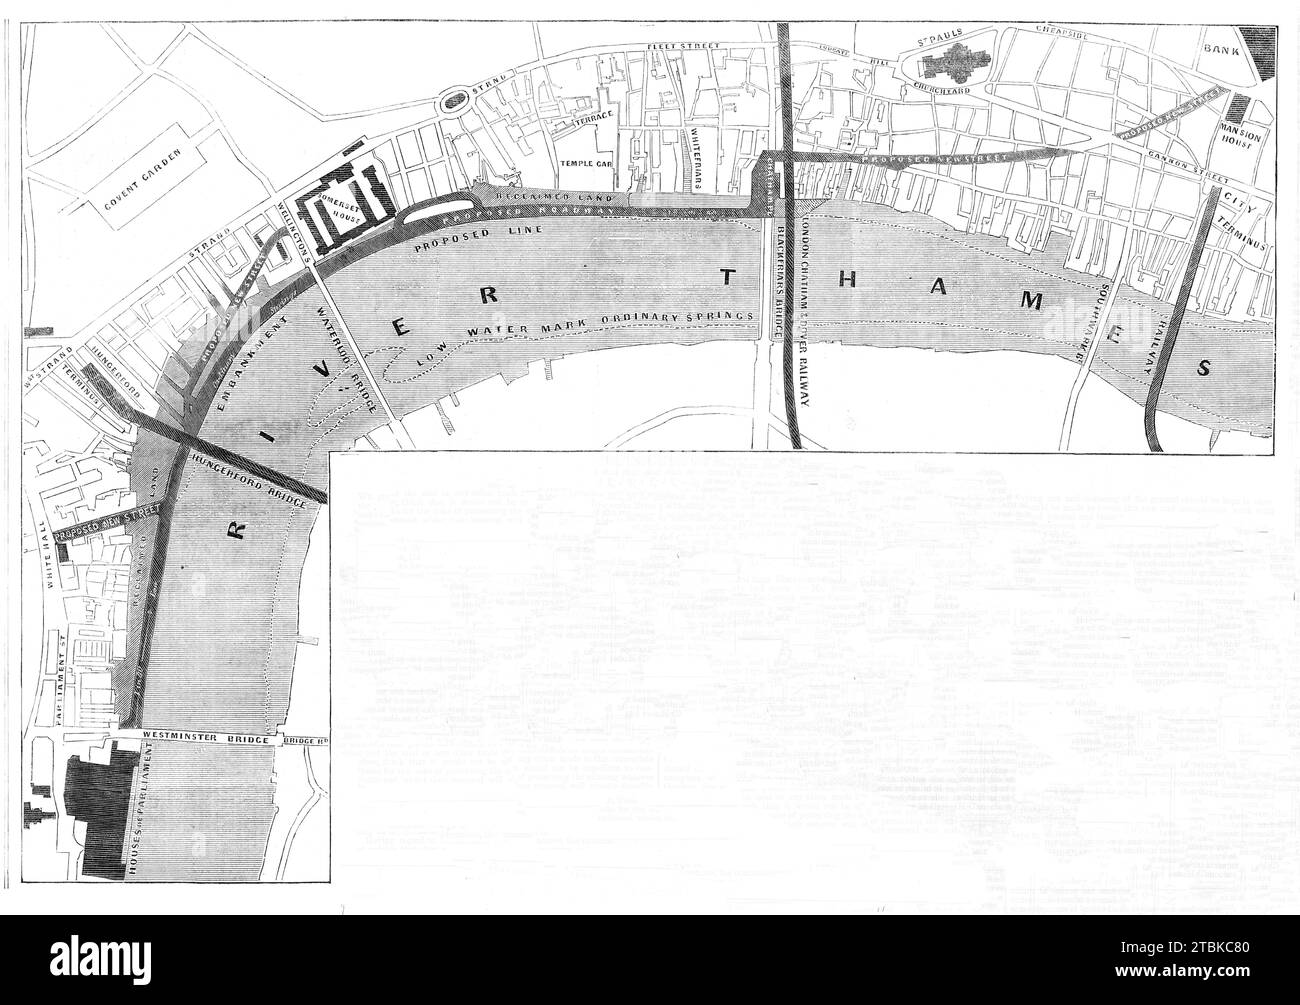 Plan of the proposed Thames Embankment, [London], 1861. Map showing '...plans for embanking the River Thames within the metropolis, so as to provide with the greatest efficiency and economy for the relief of the most crowded streets, by the establishment of a new and spacious thoroughfare, for the improvement of the navigation of the river, and which will afford an opportunity of making the low-level sewer without disturbing the Strand or Fleet-street, and also to report upon the cost and means of carrying the same into execution'. From &quot;Illustrated London News&quot;, 1861. Stock Photo